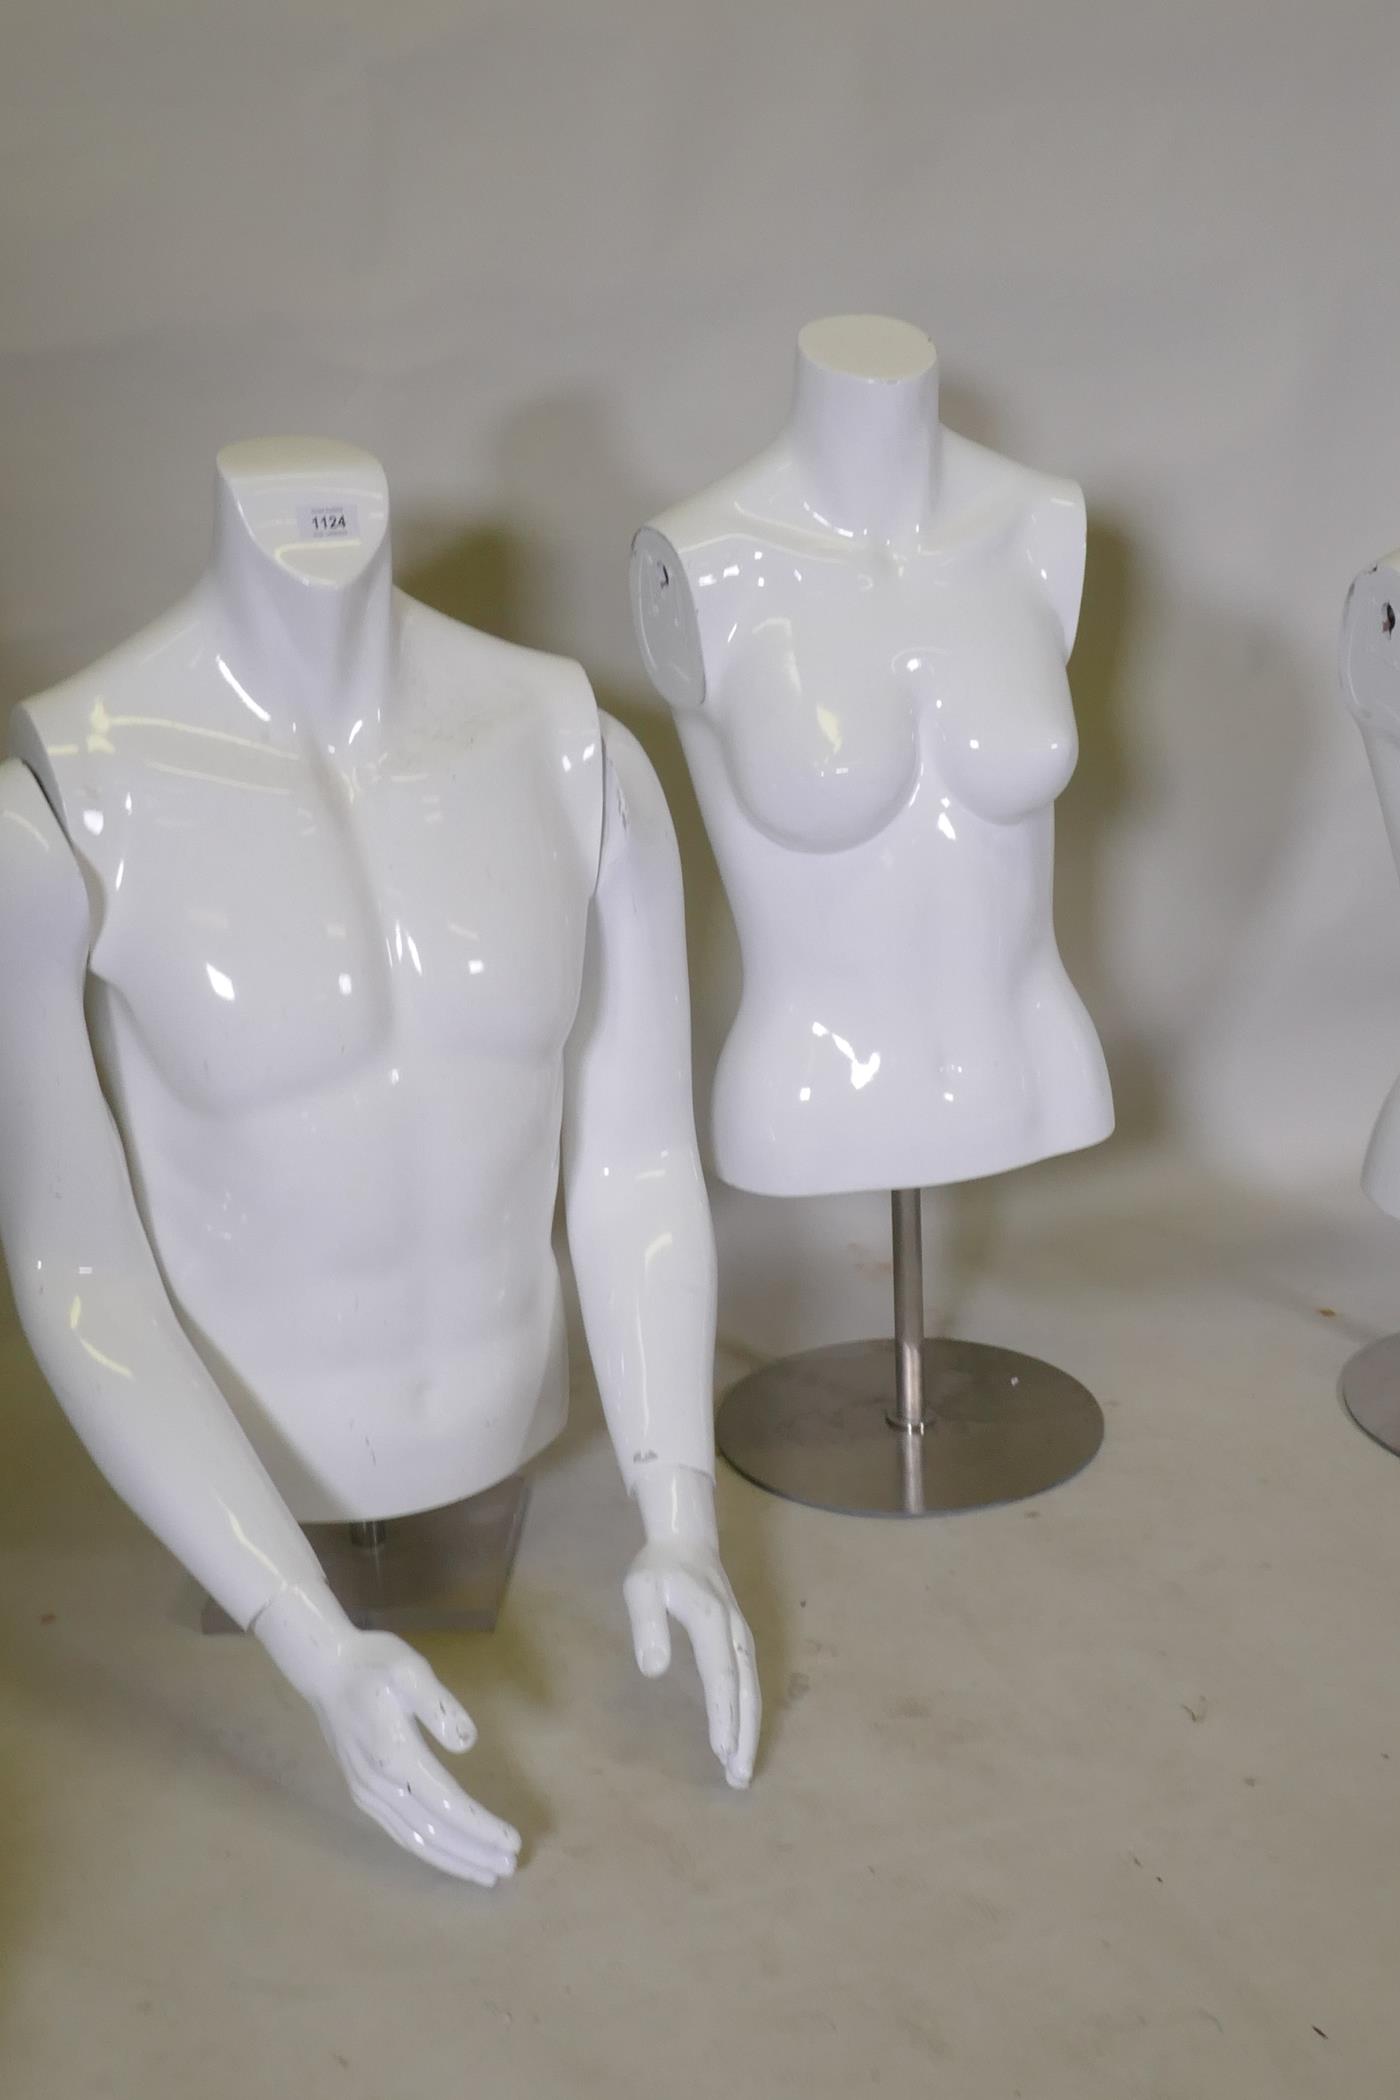 Three acrylic shop mannequins, 85cm high - Image 2 of 3